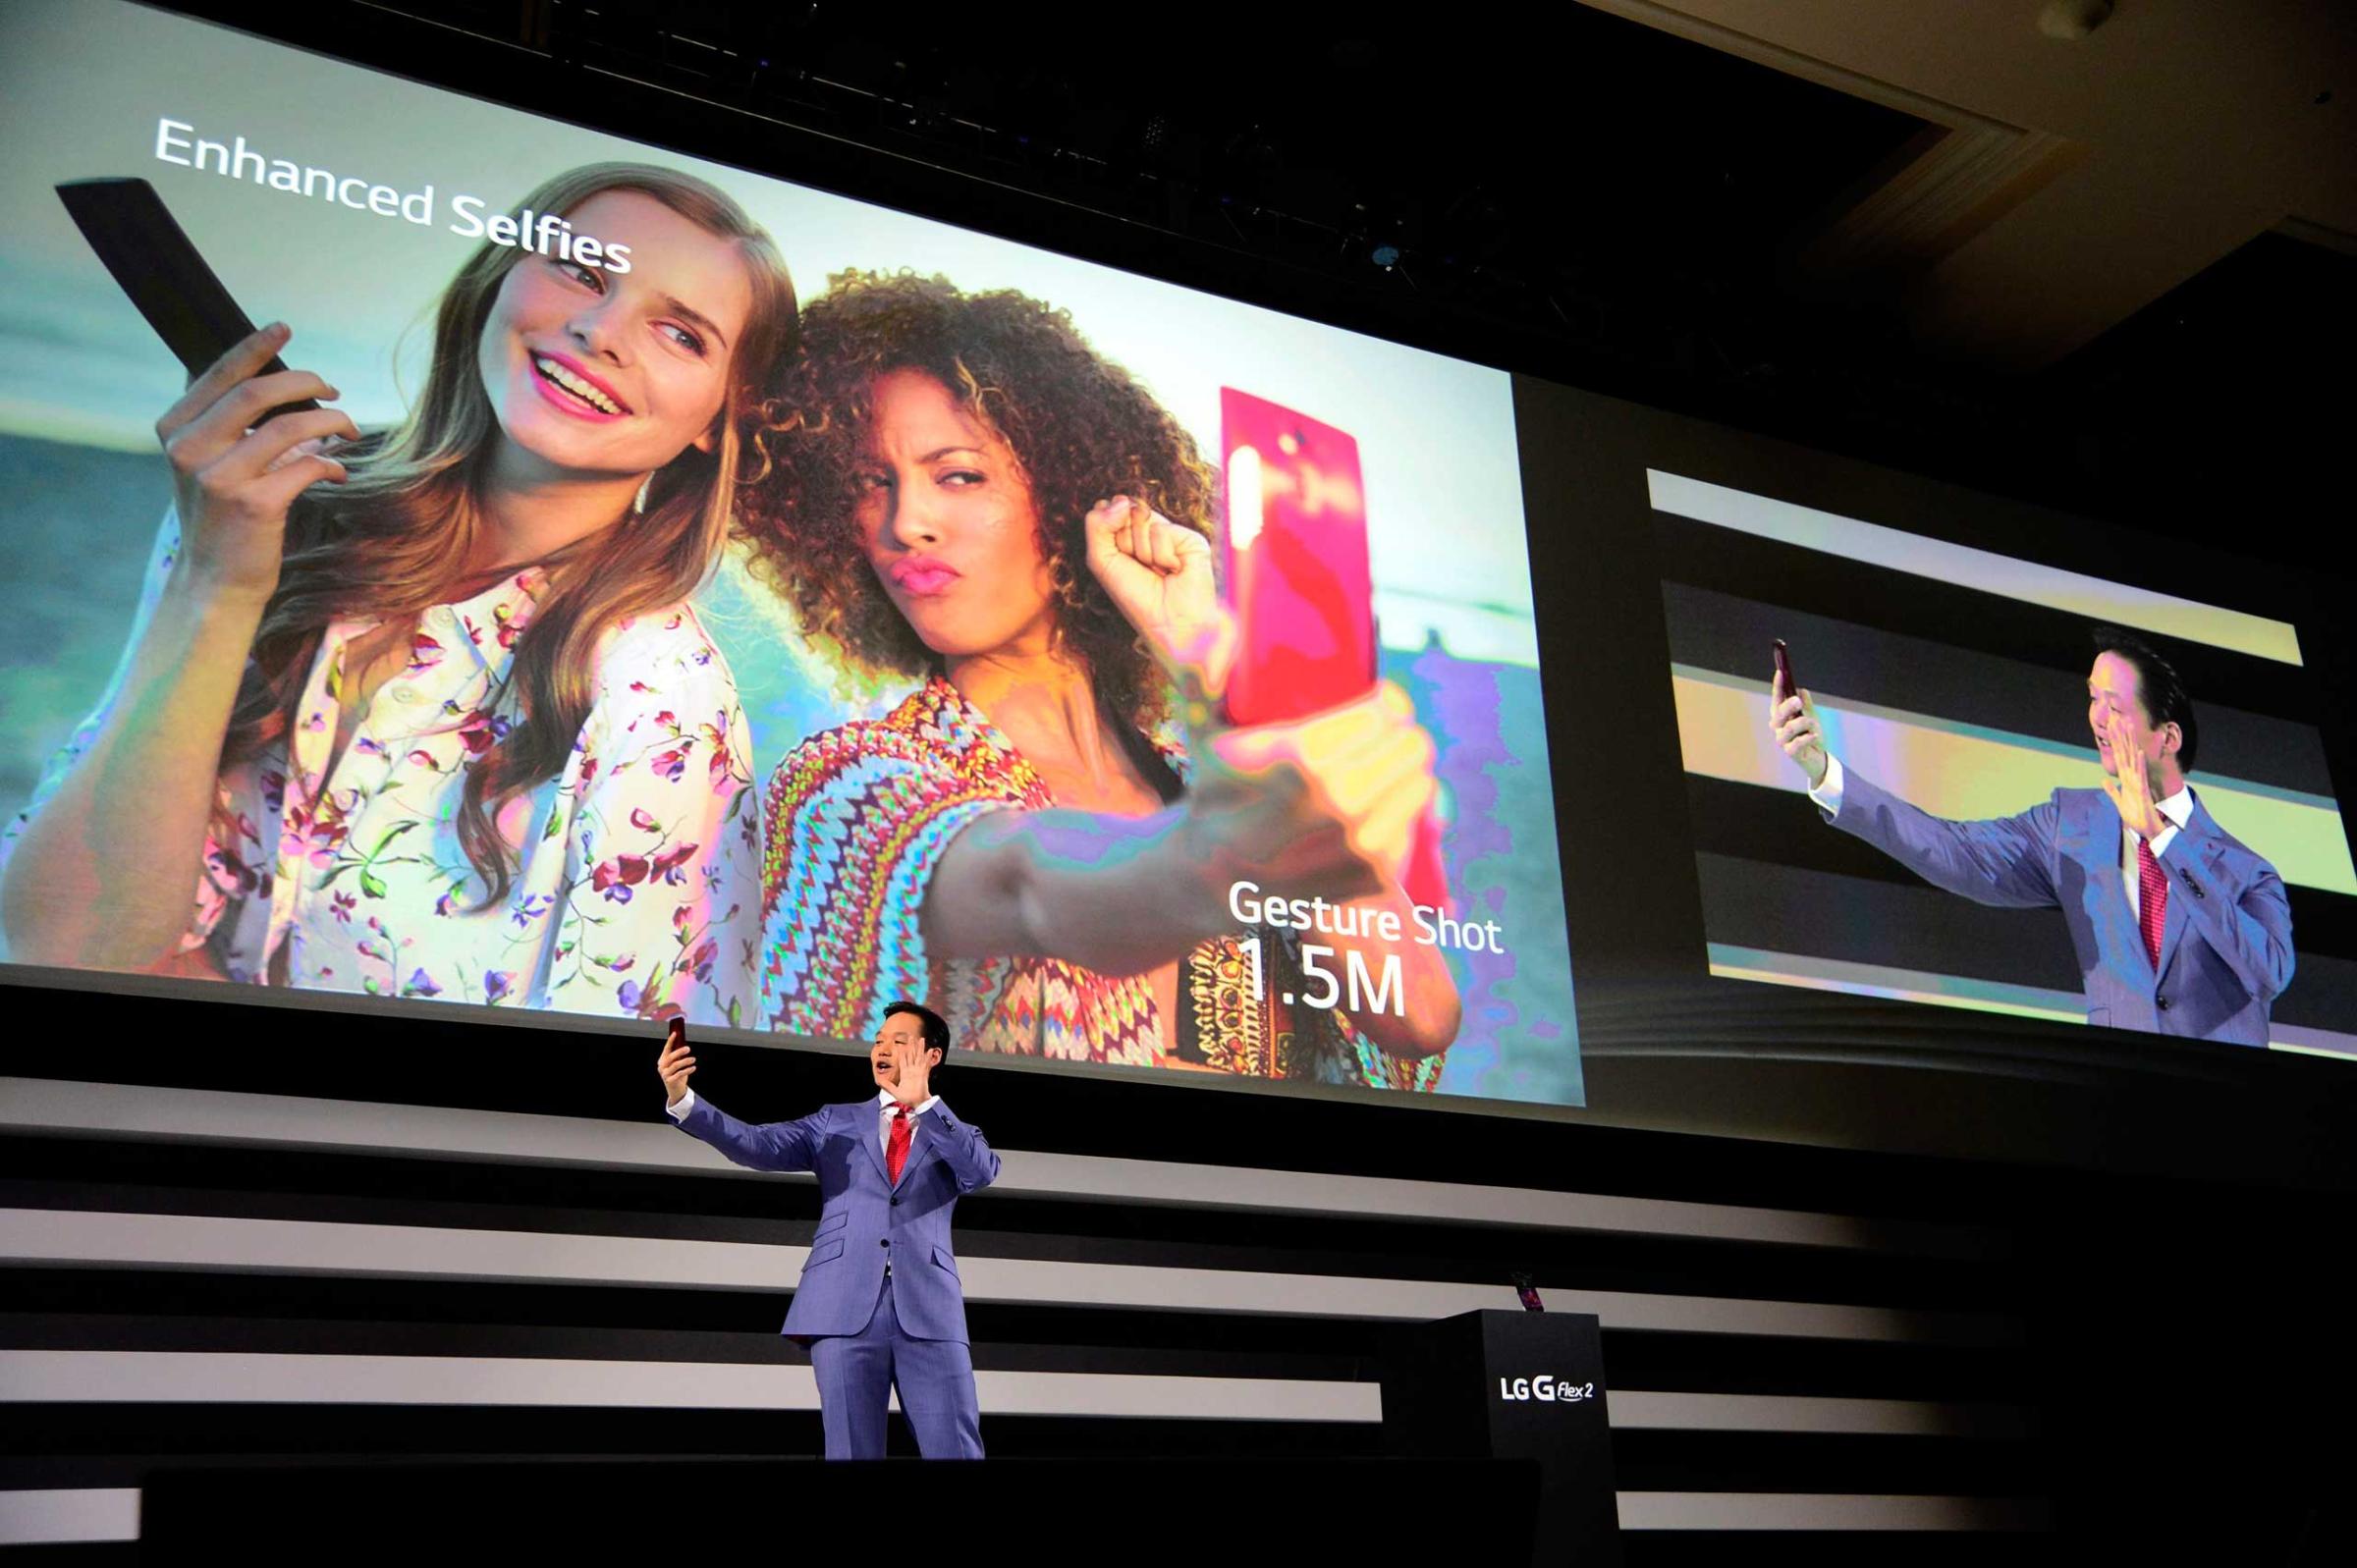 Frank Lee, Brand Marketing for LG Electronics MobileComm USA, demonstrates the enhanced selfie feature on the new LG G Flex 2 mobile phone on press day for the 2015 International Consumer Electronics Show (CES) at the Mandalay Bay Convention Center in Las Vegas on Jan. 5, 2015.